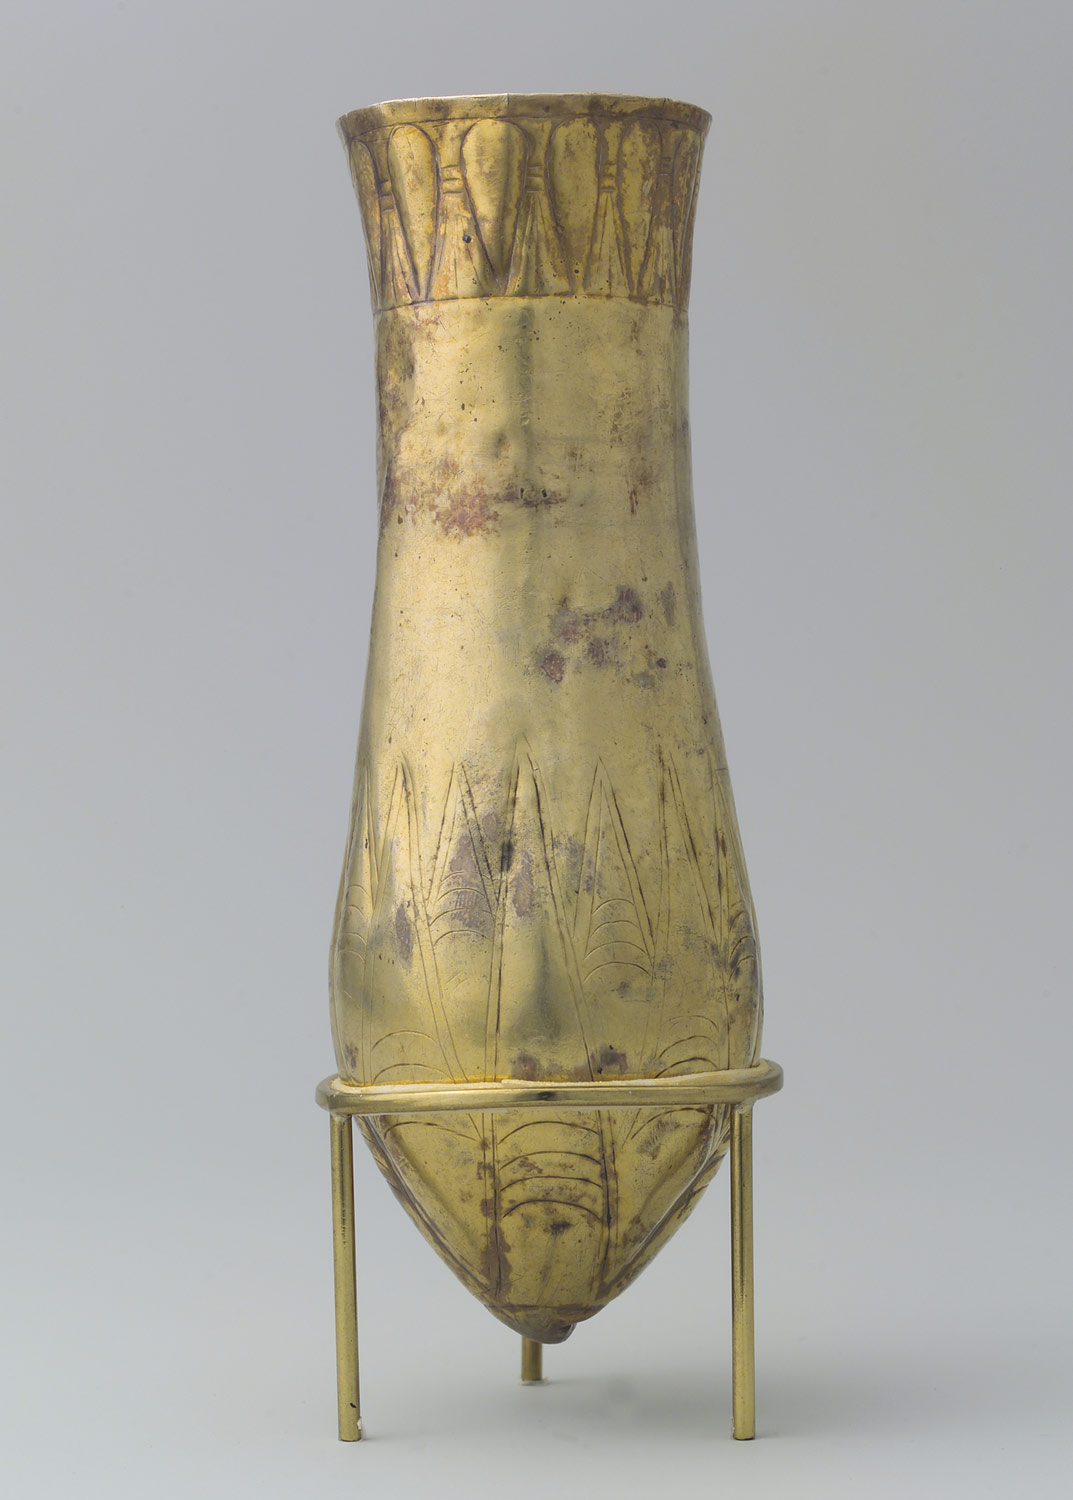 Situla with floral decoration